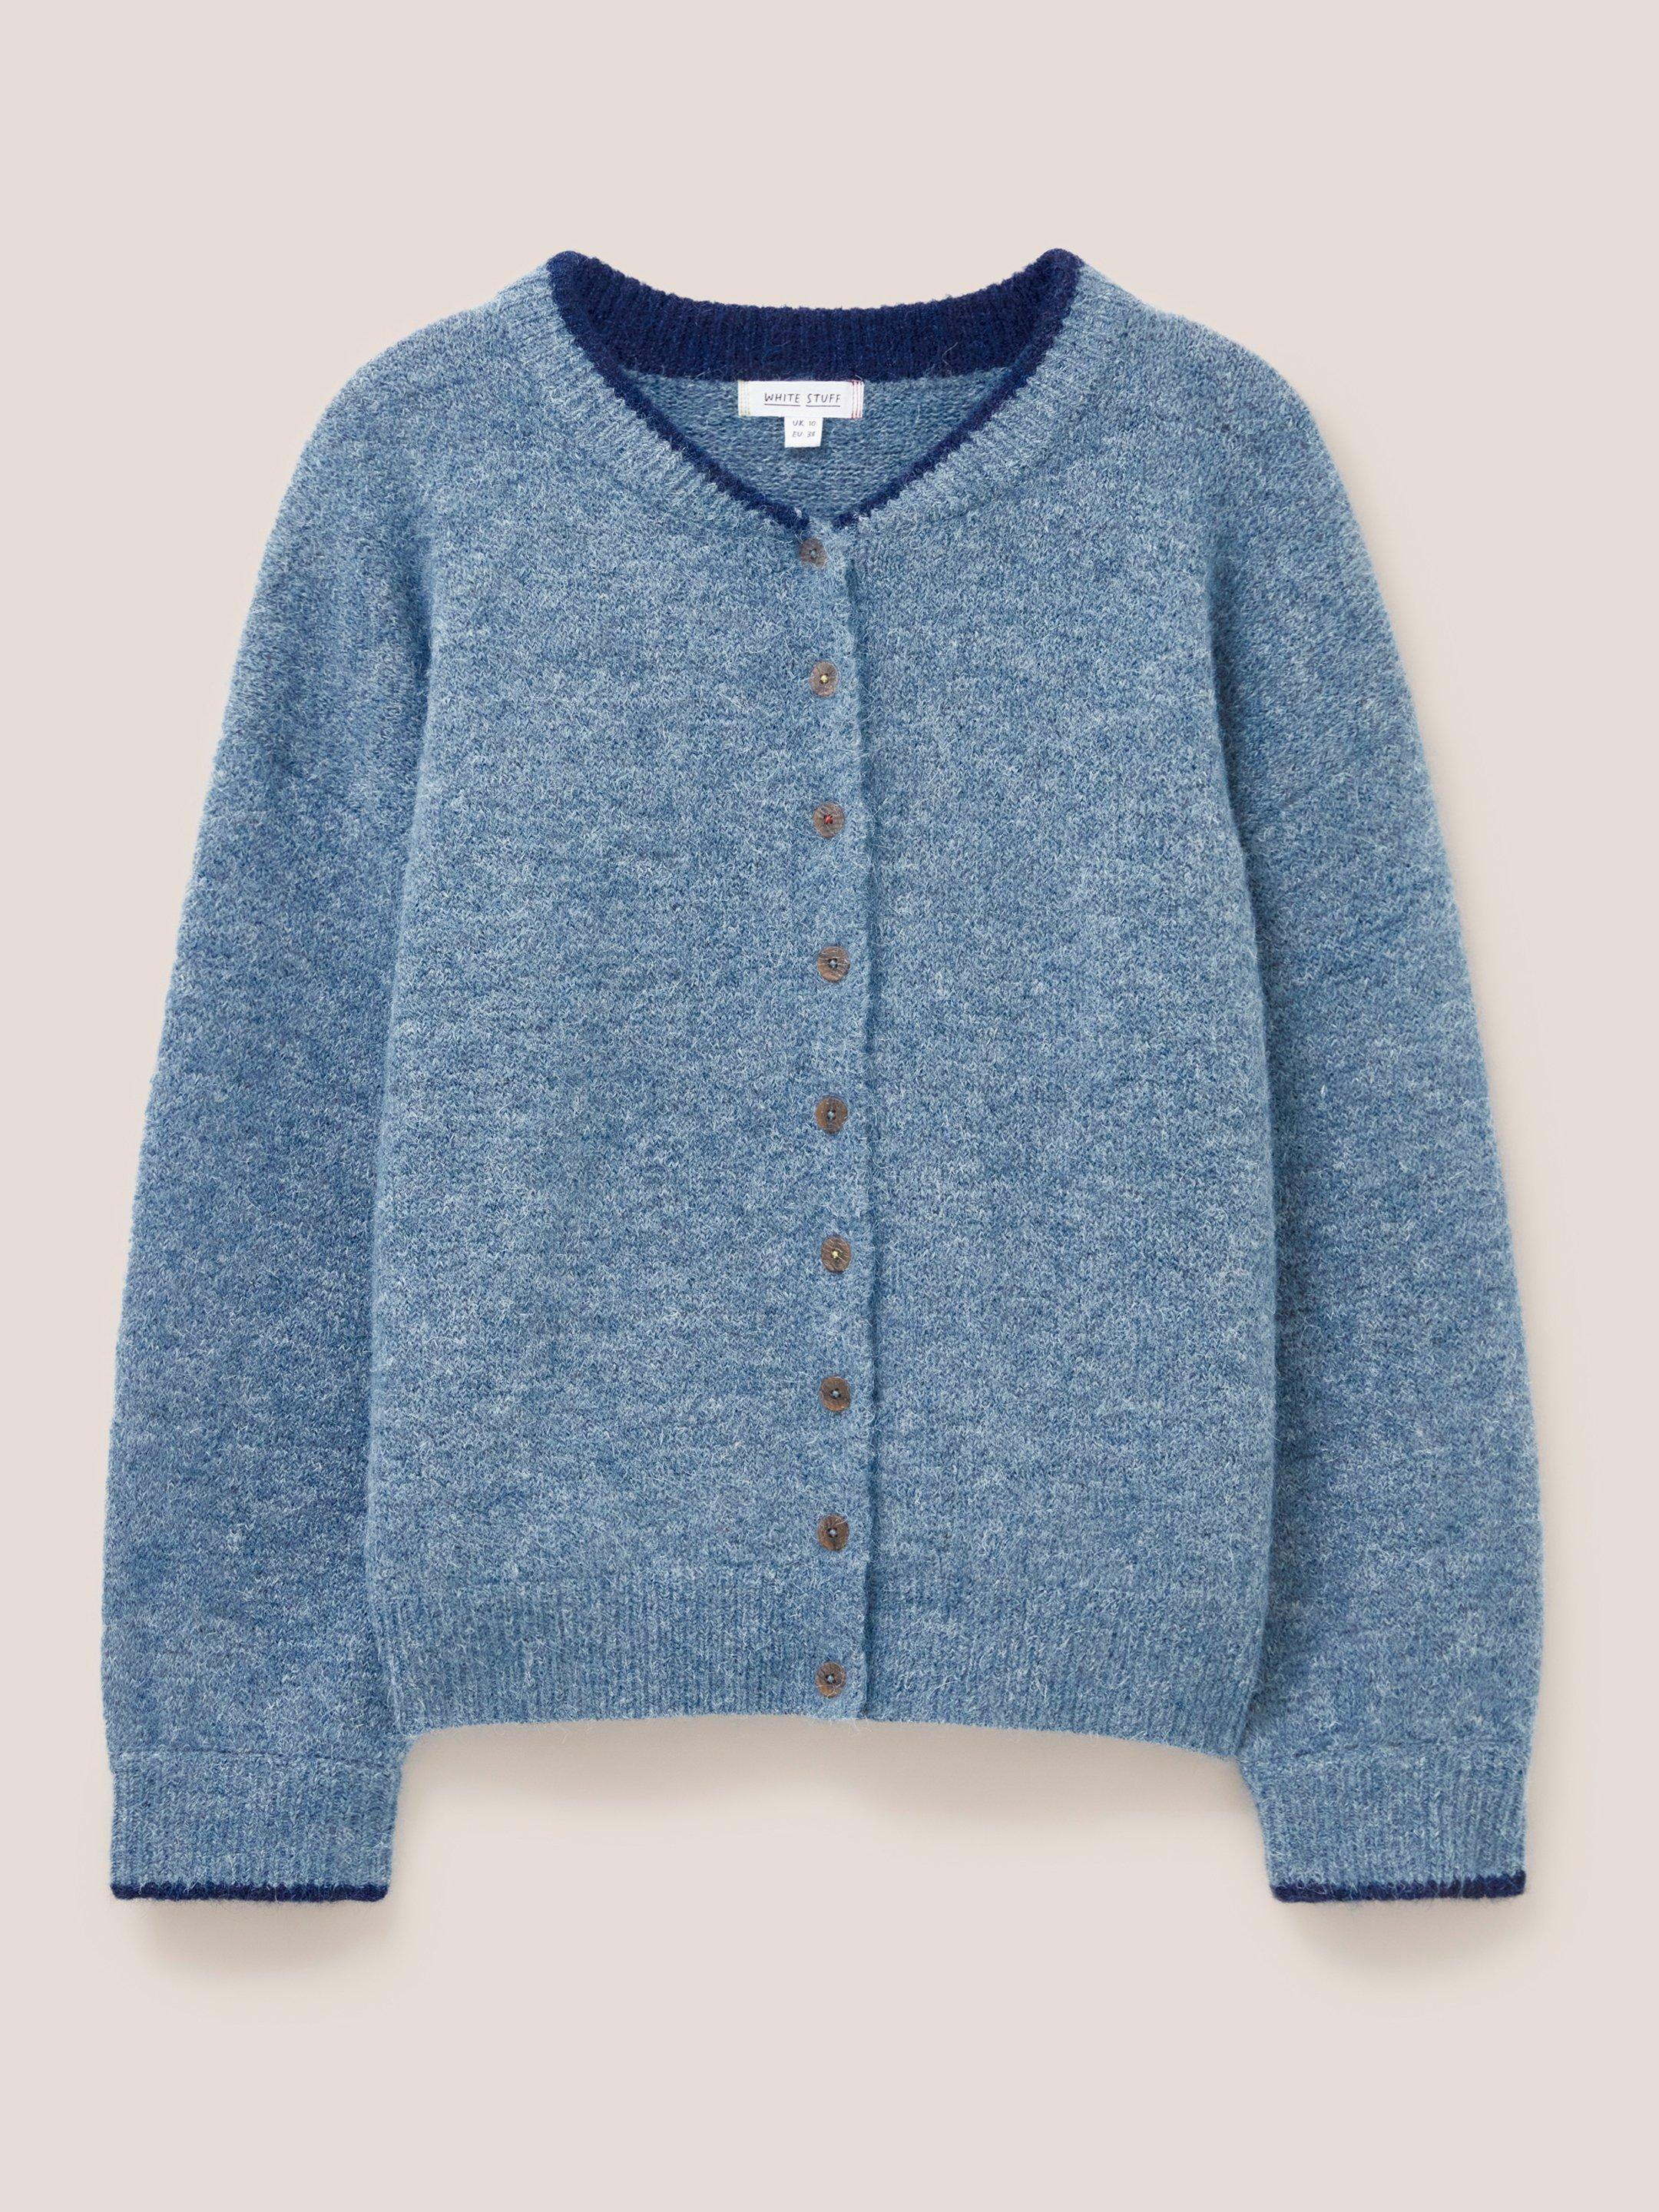 SAVICK BOMBER in MID BLUE - FLAT FRONT